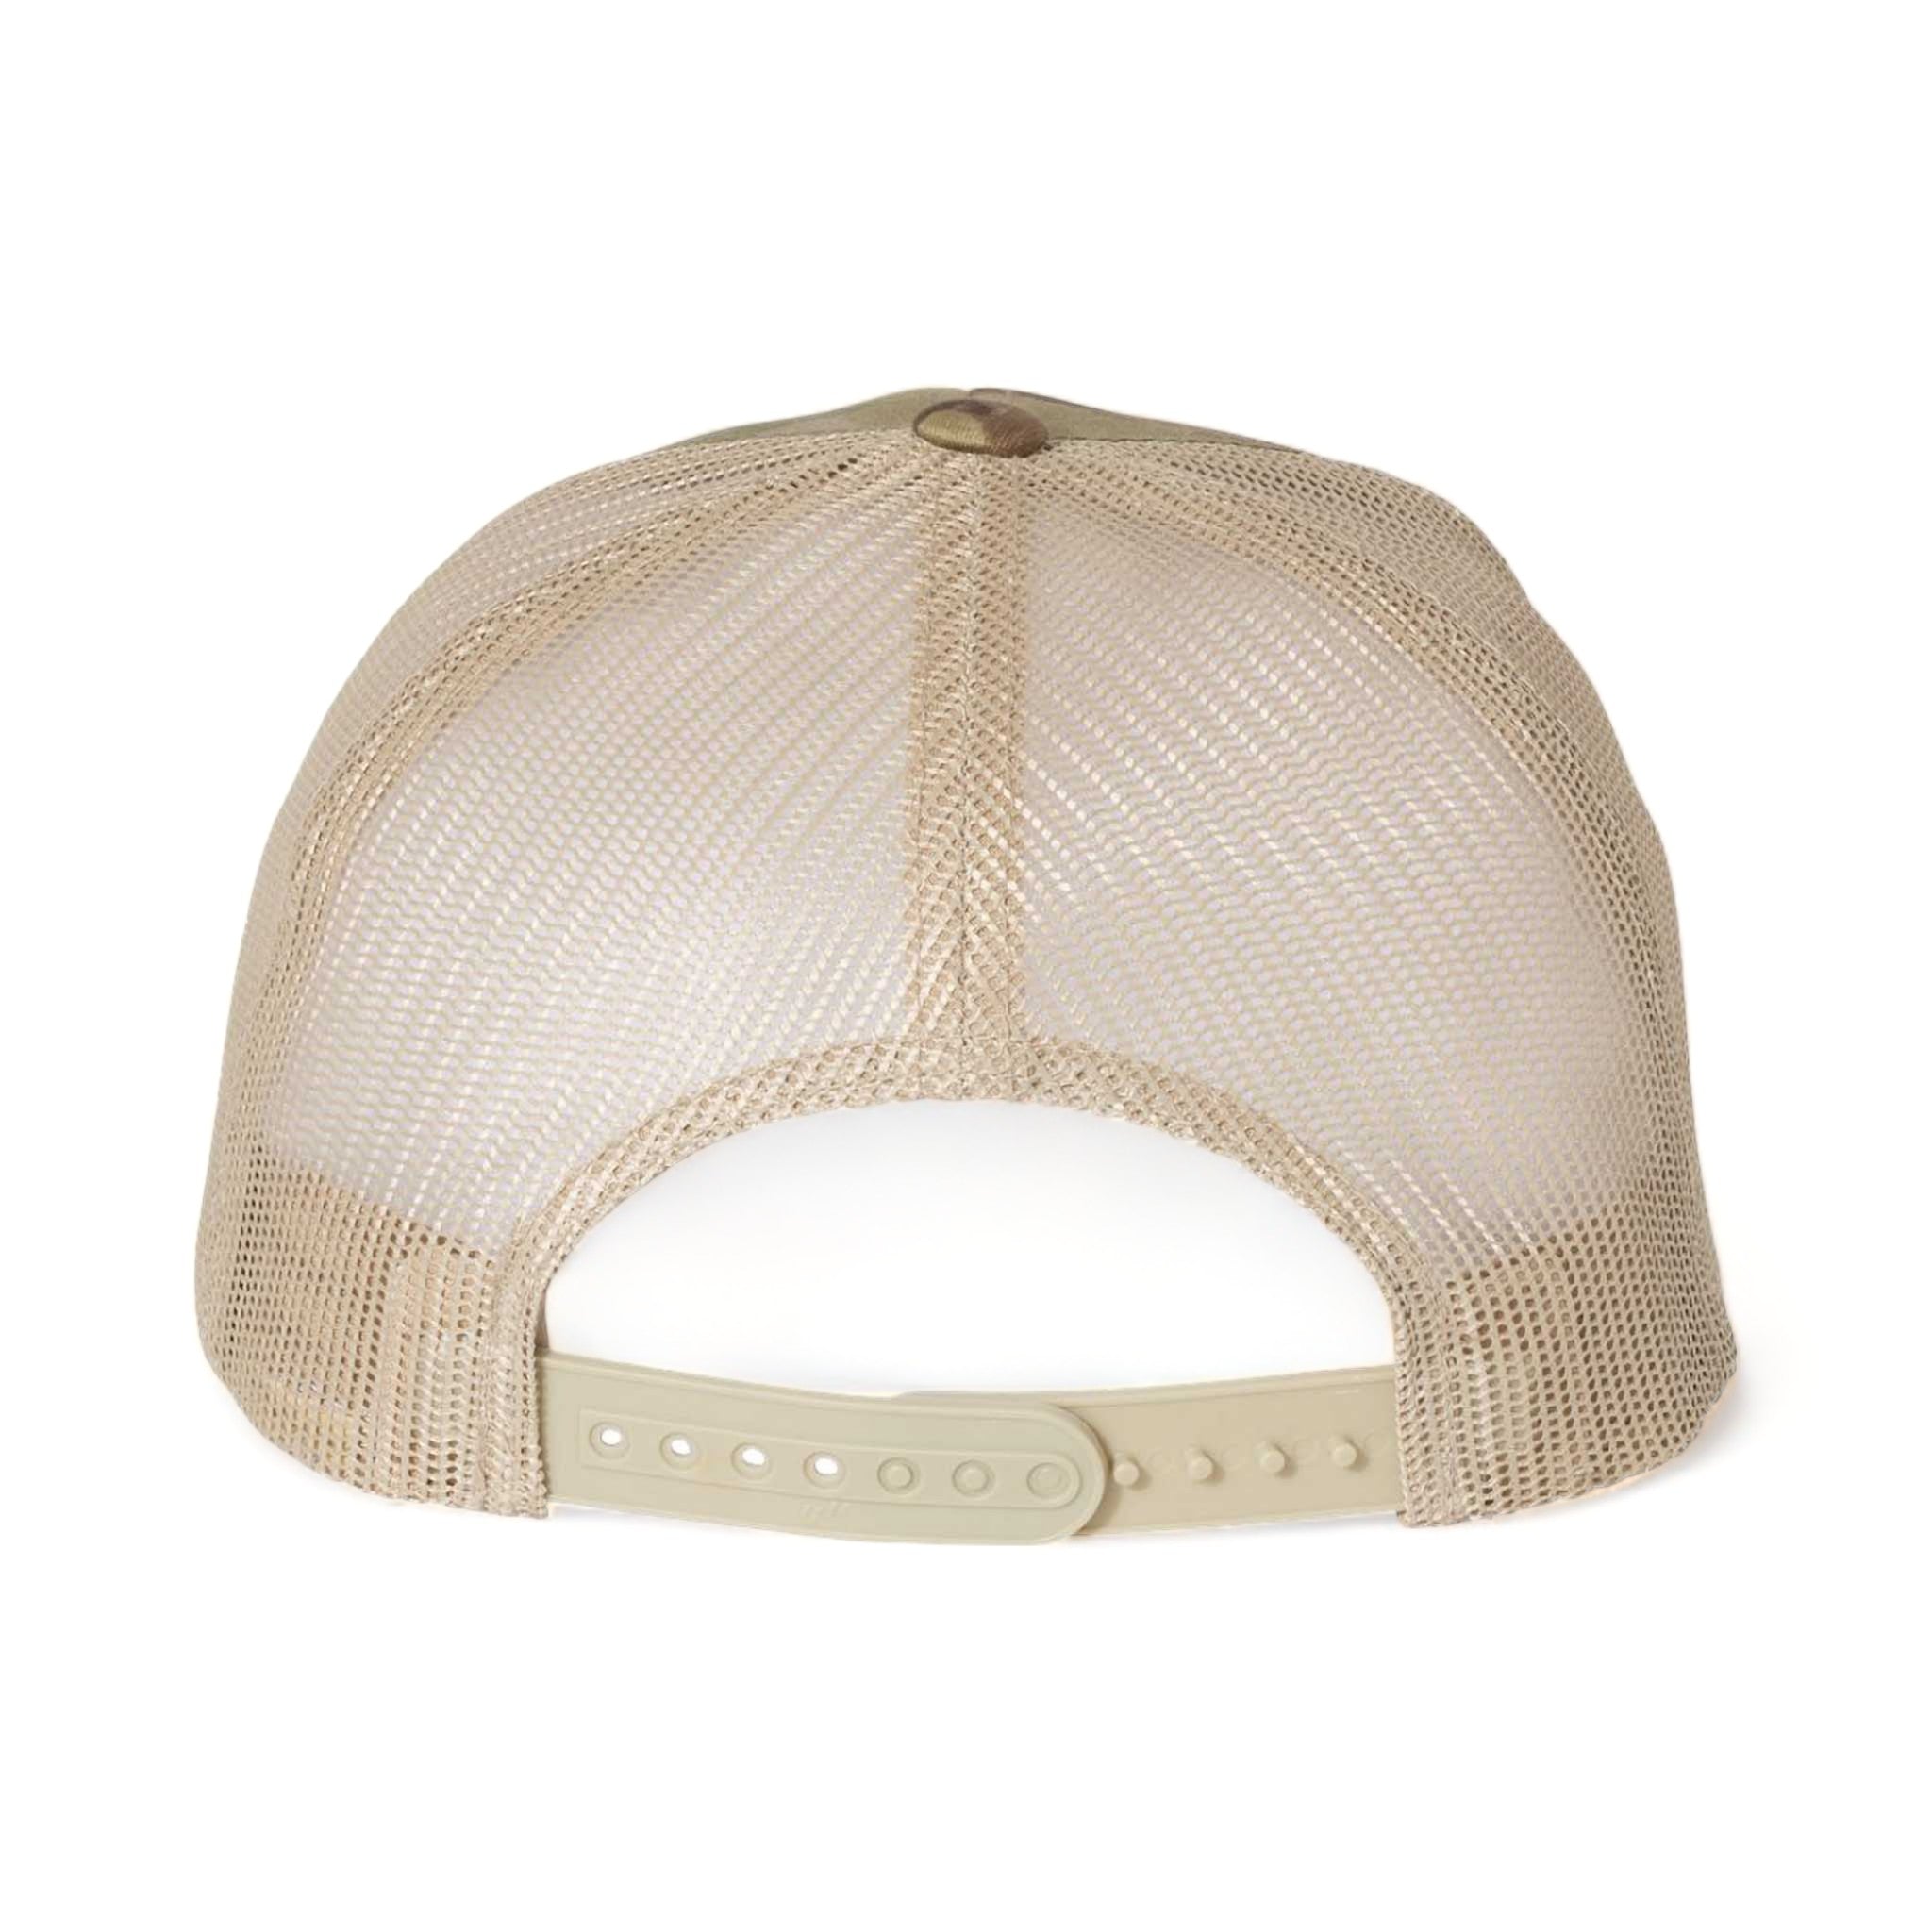 Back view of YP Classics 6606 custom hat in multicam green and khaki